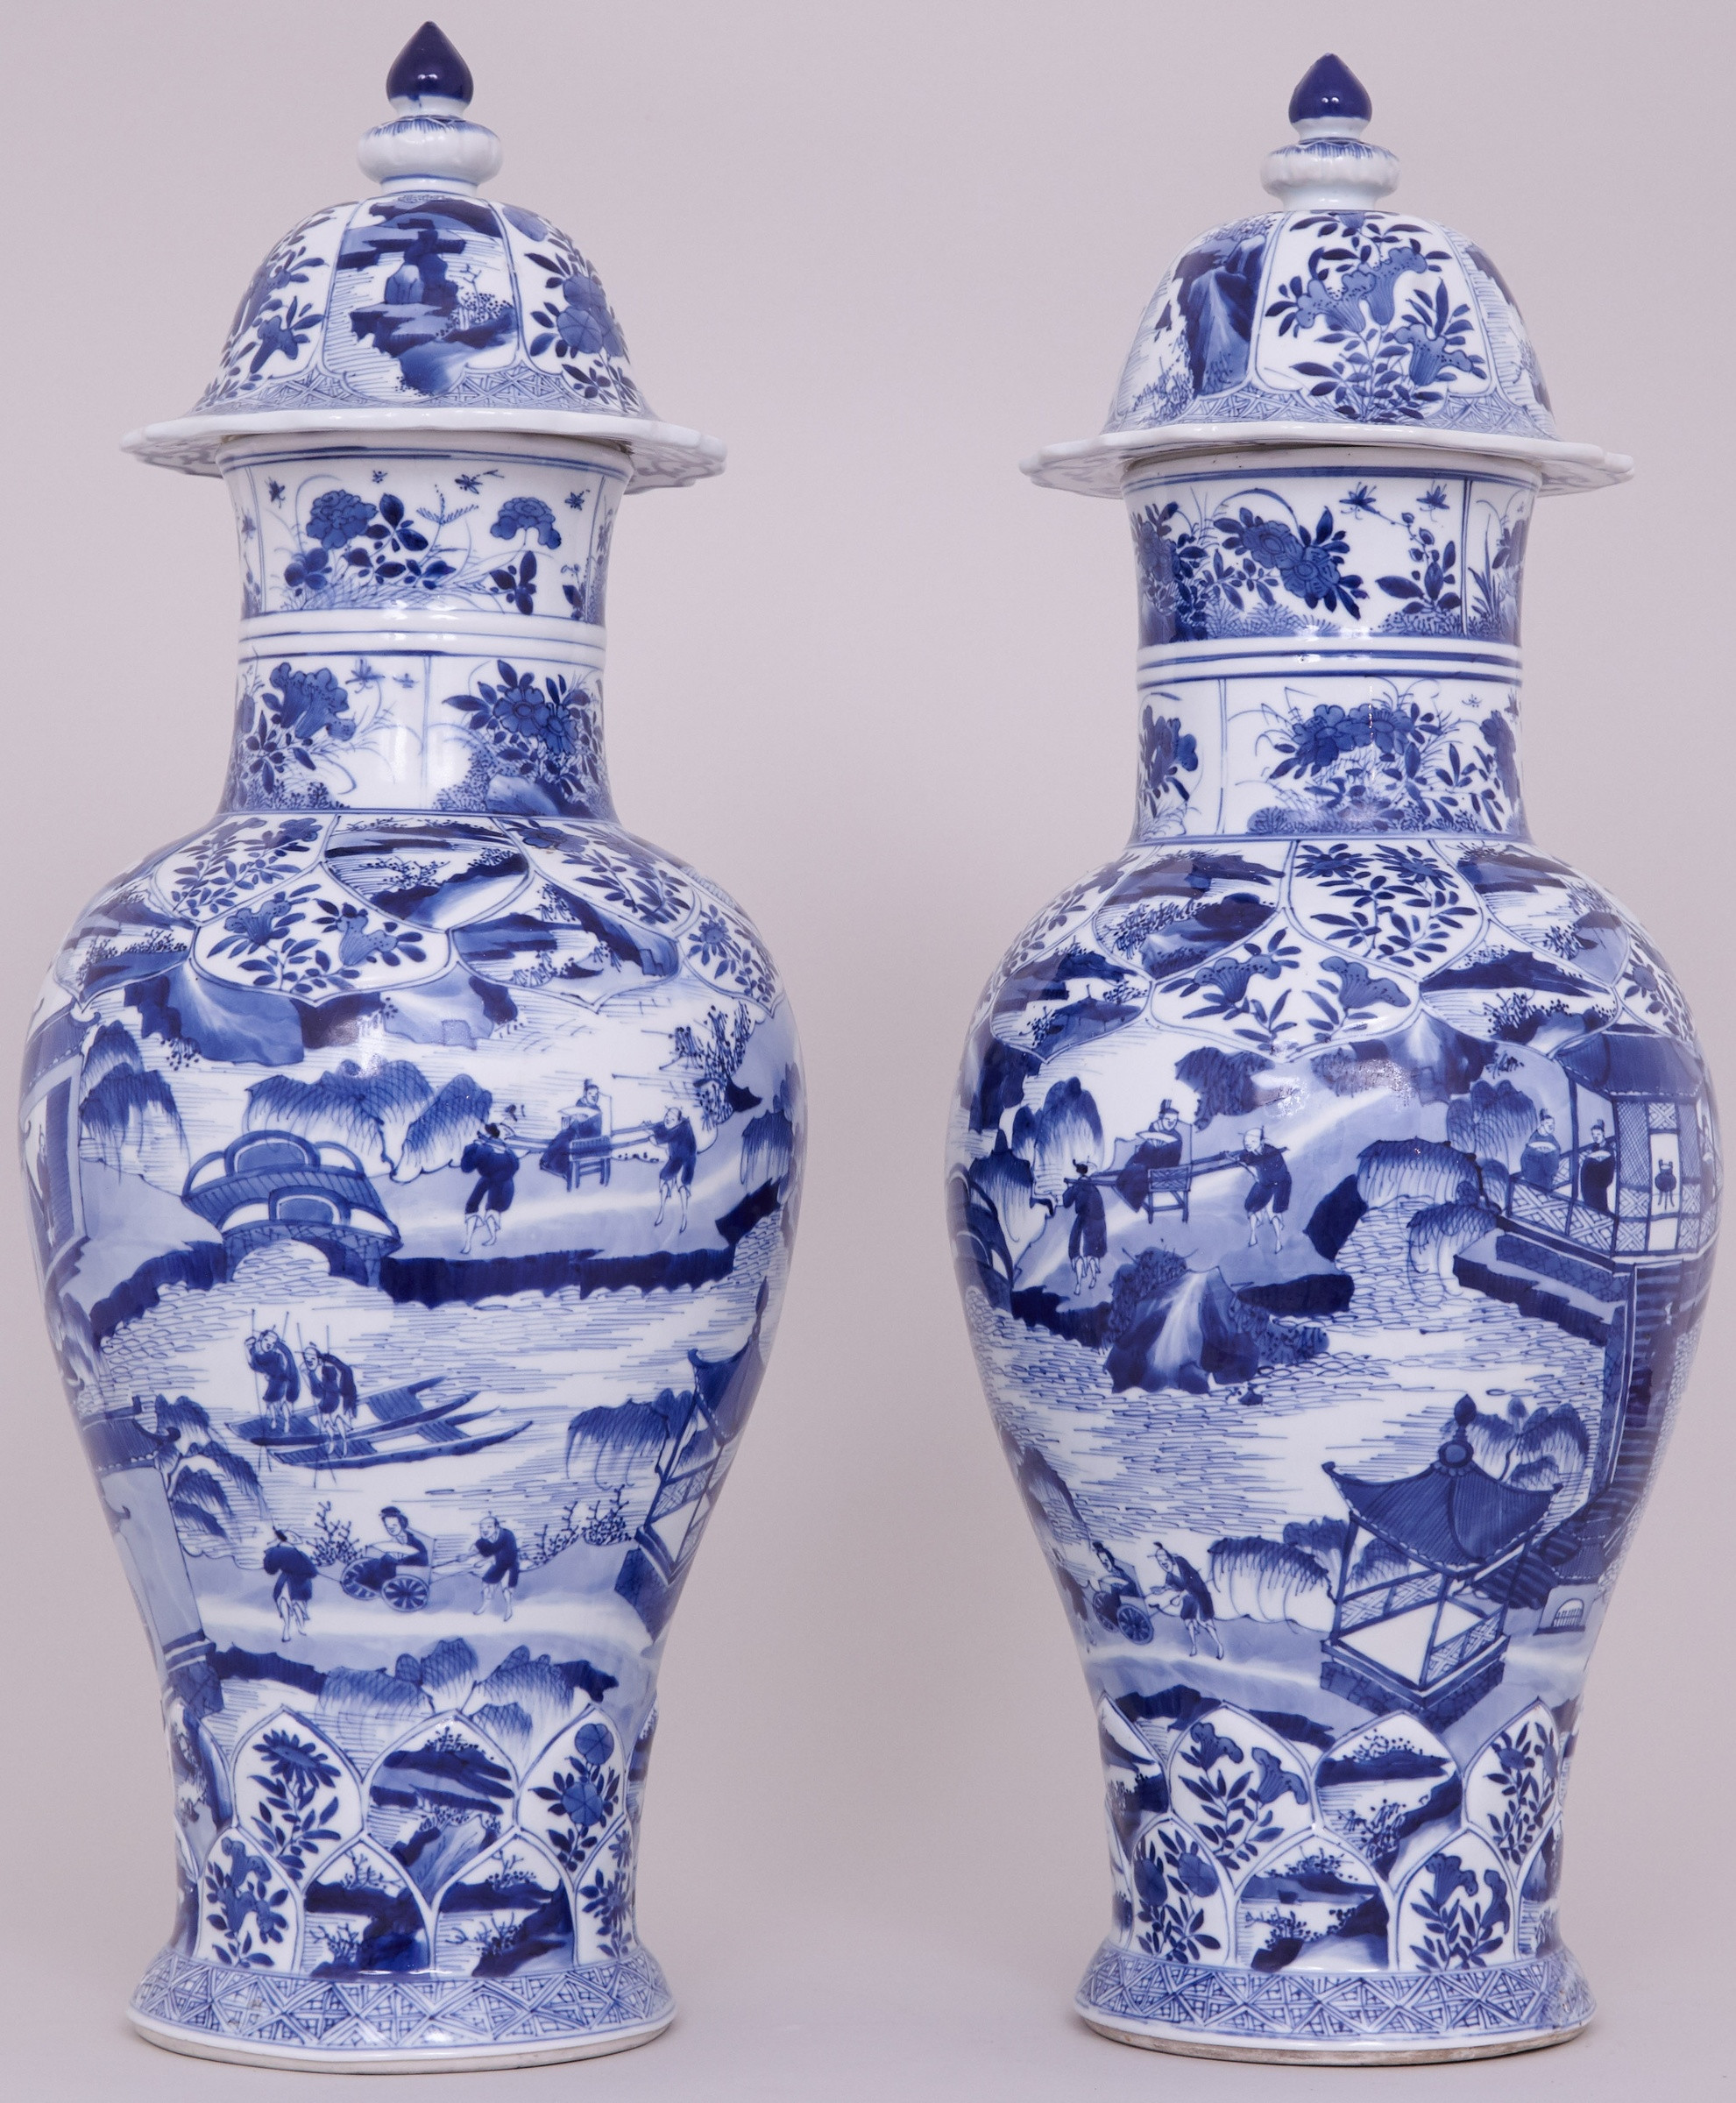 13 Unique Lady Head Vases 2024 free download lady head vases of a pair of highly unusual tall and fine chinese blue and white vases intended for a pair of highly unusual tall and fine chinese blue and white vases and covers